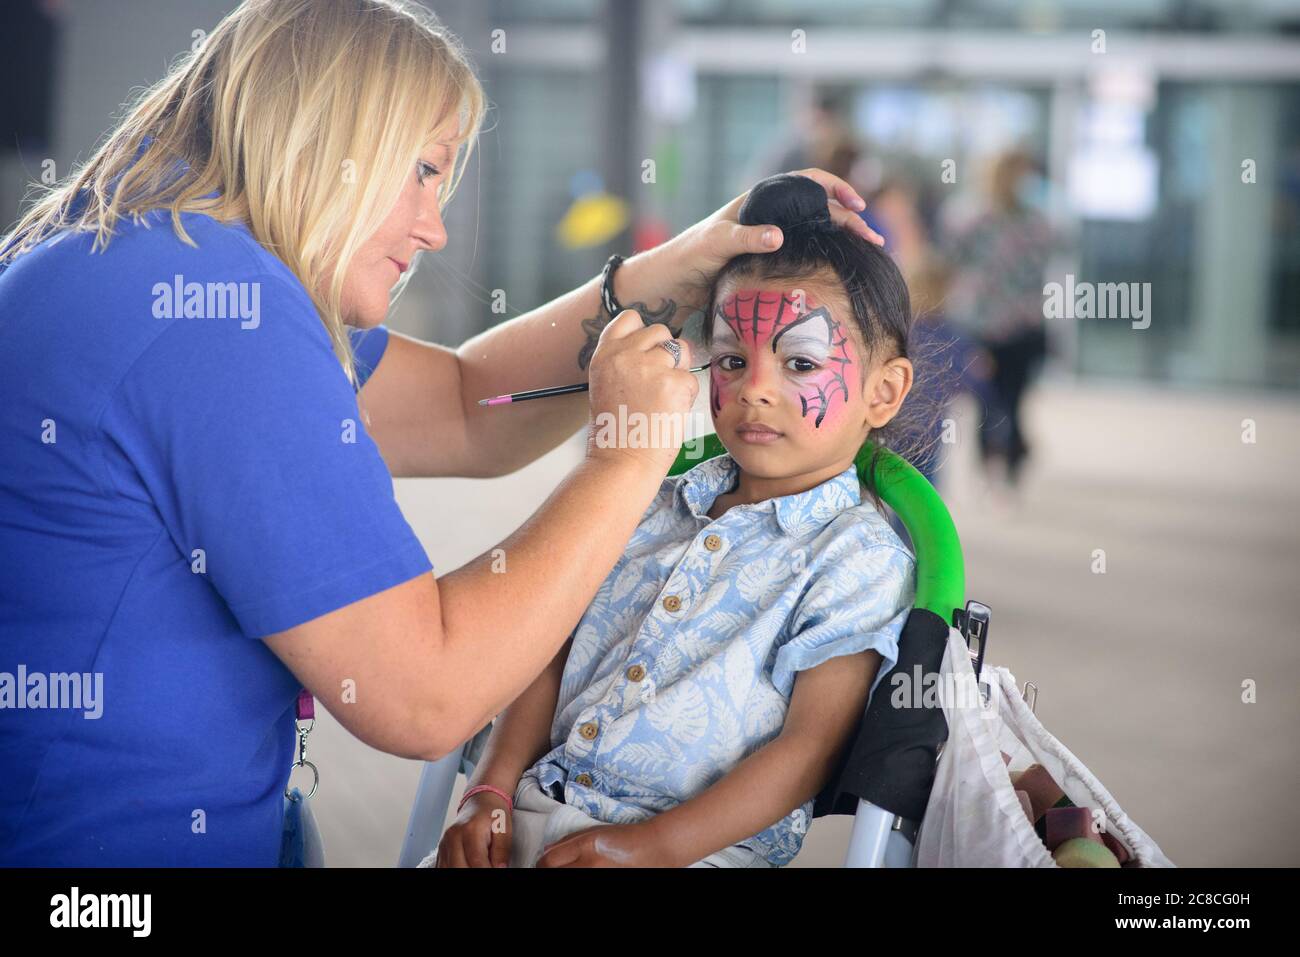 Face painting children at a family fun day. Face paint fun and many other family friendly activities outdoors on a cloudy summer day. Stock Photo